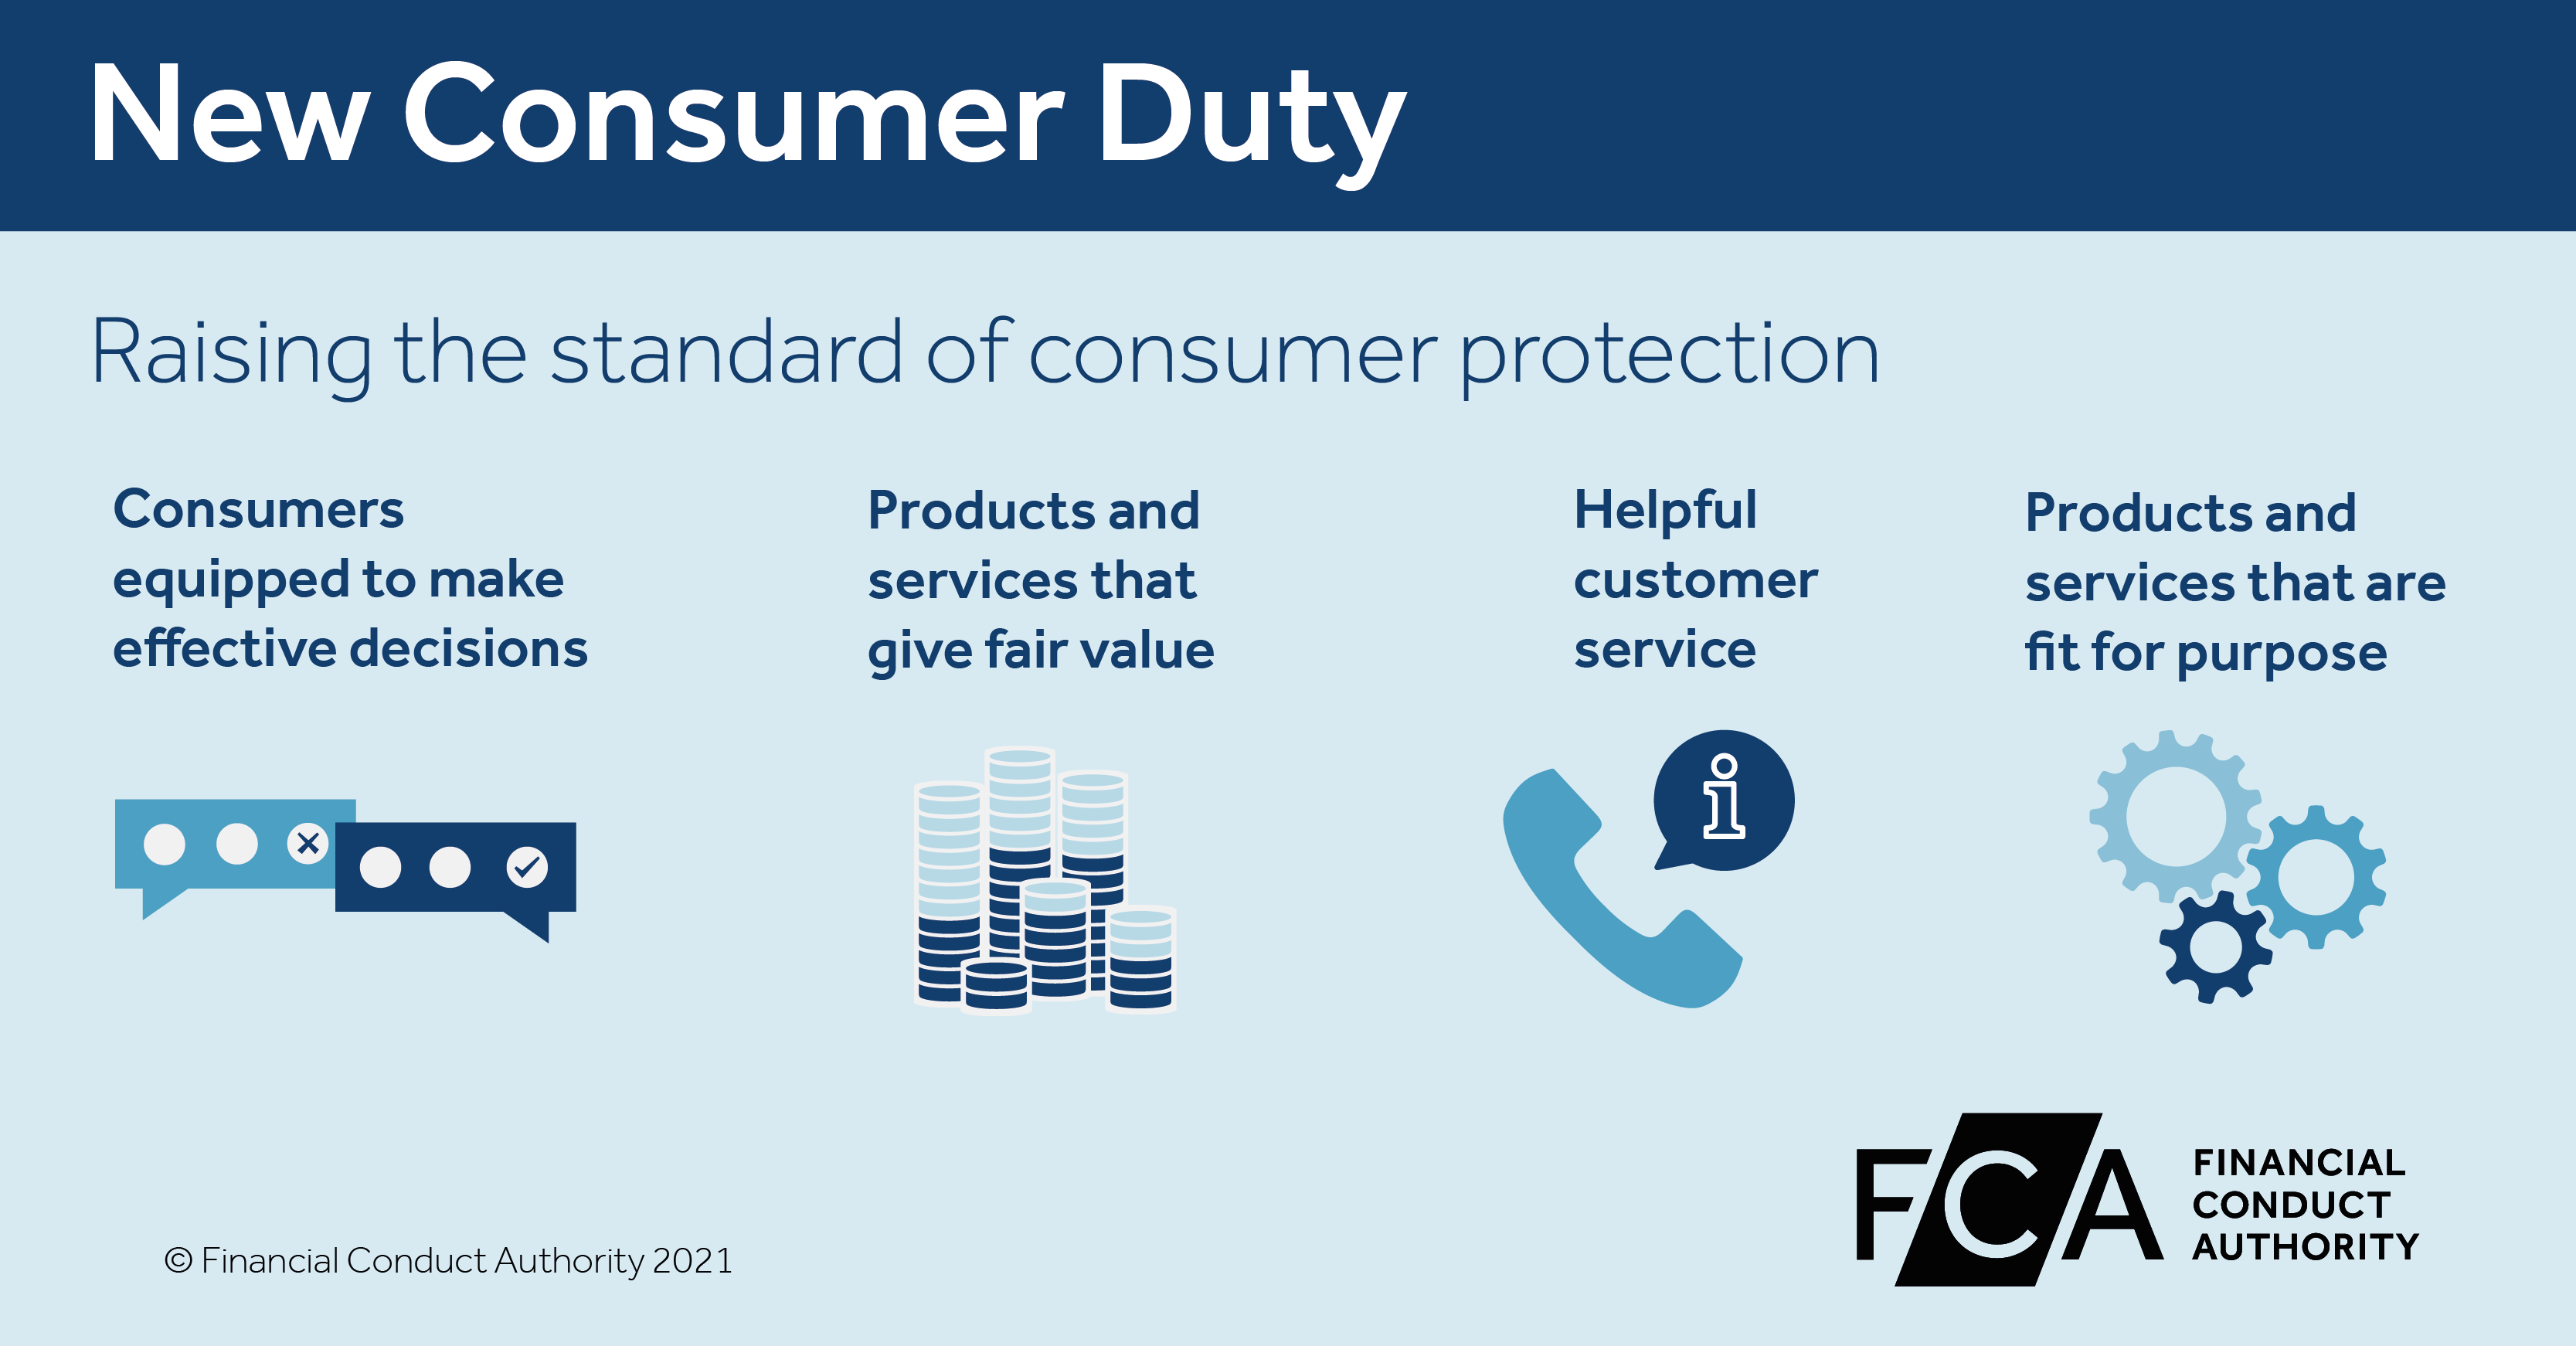 New consumer duty by FCA